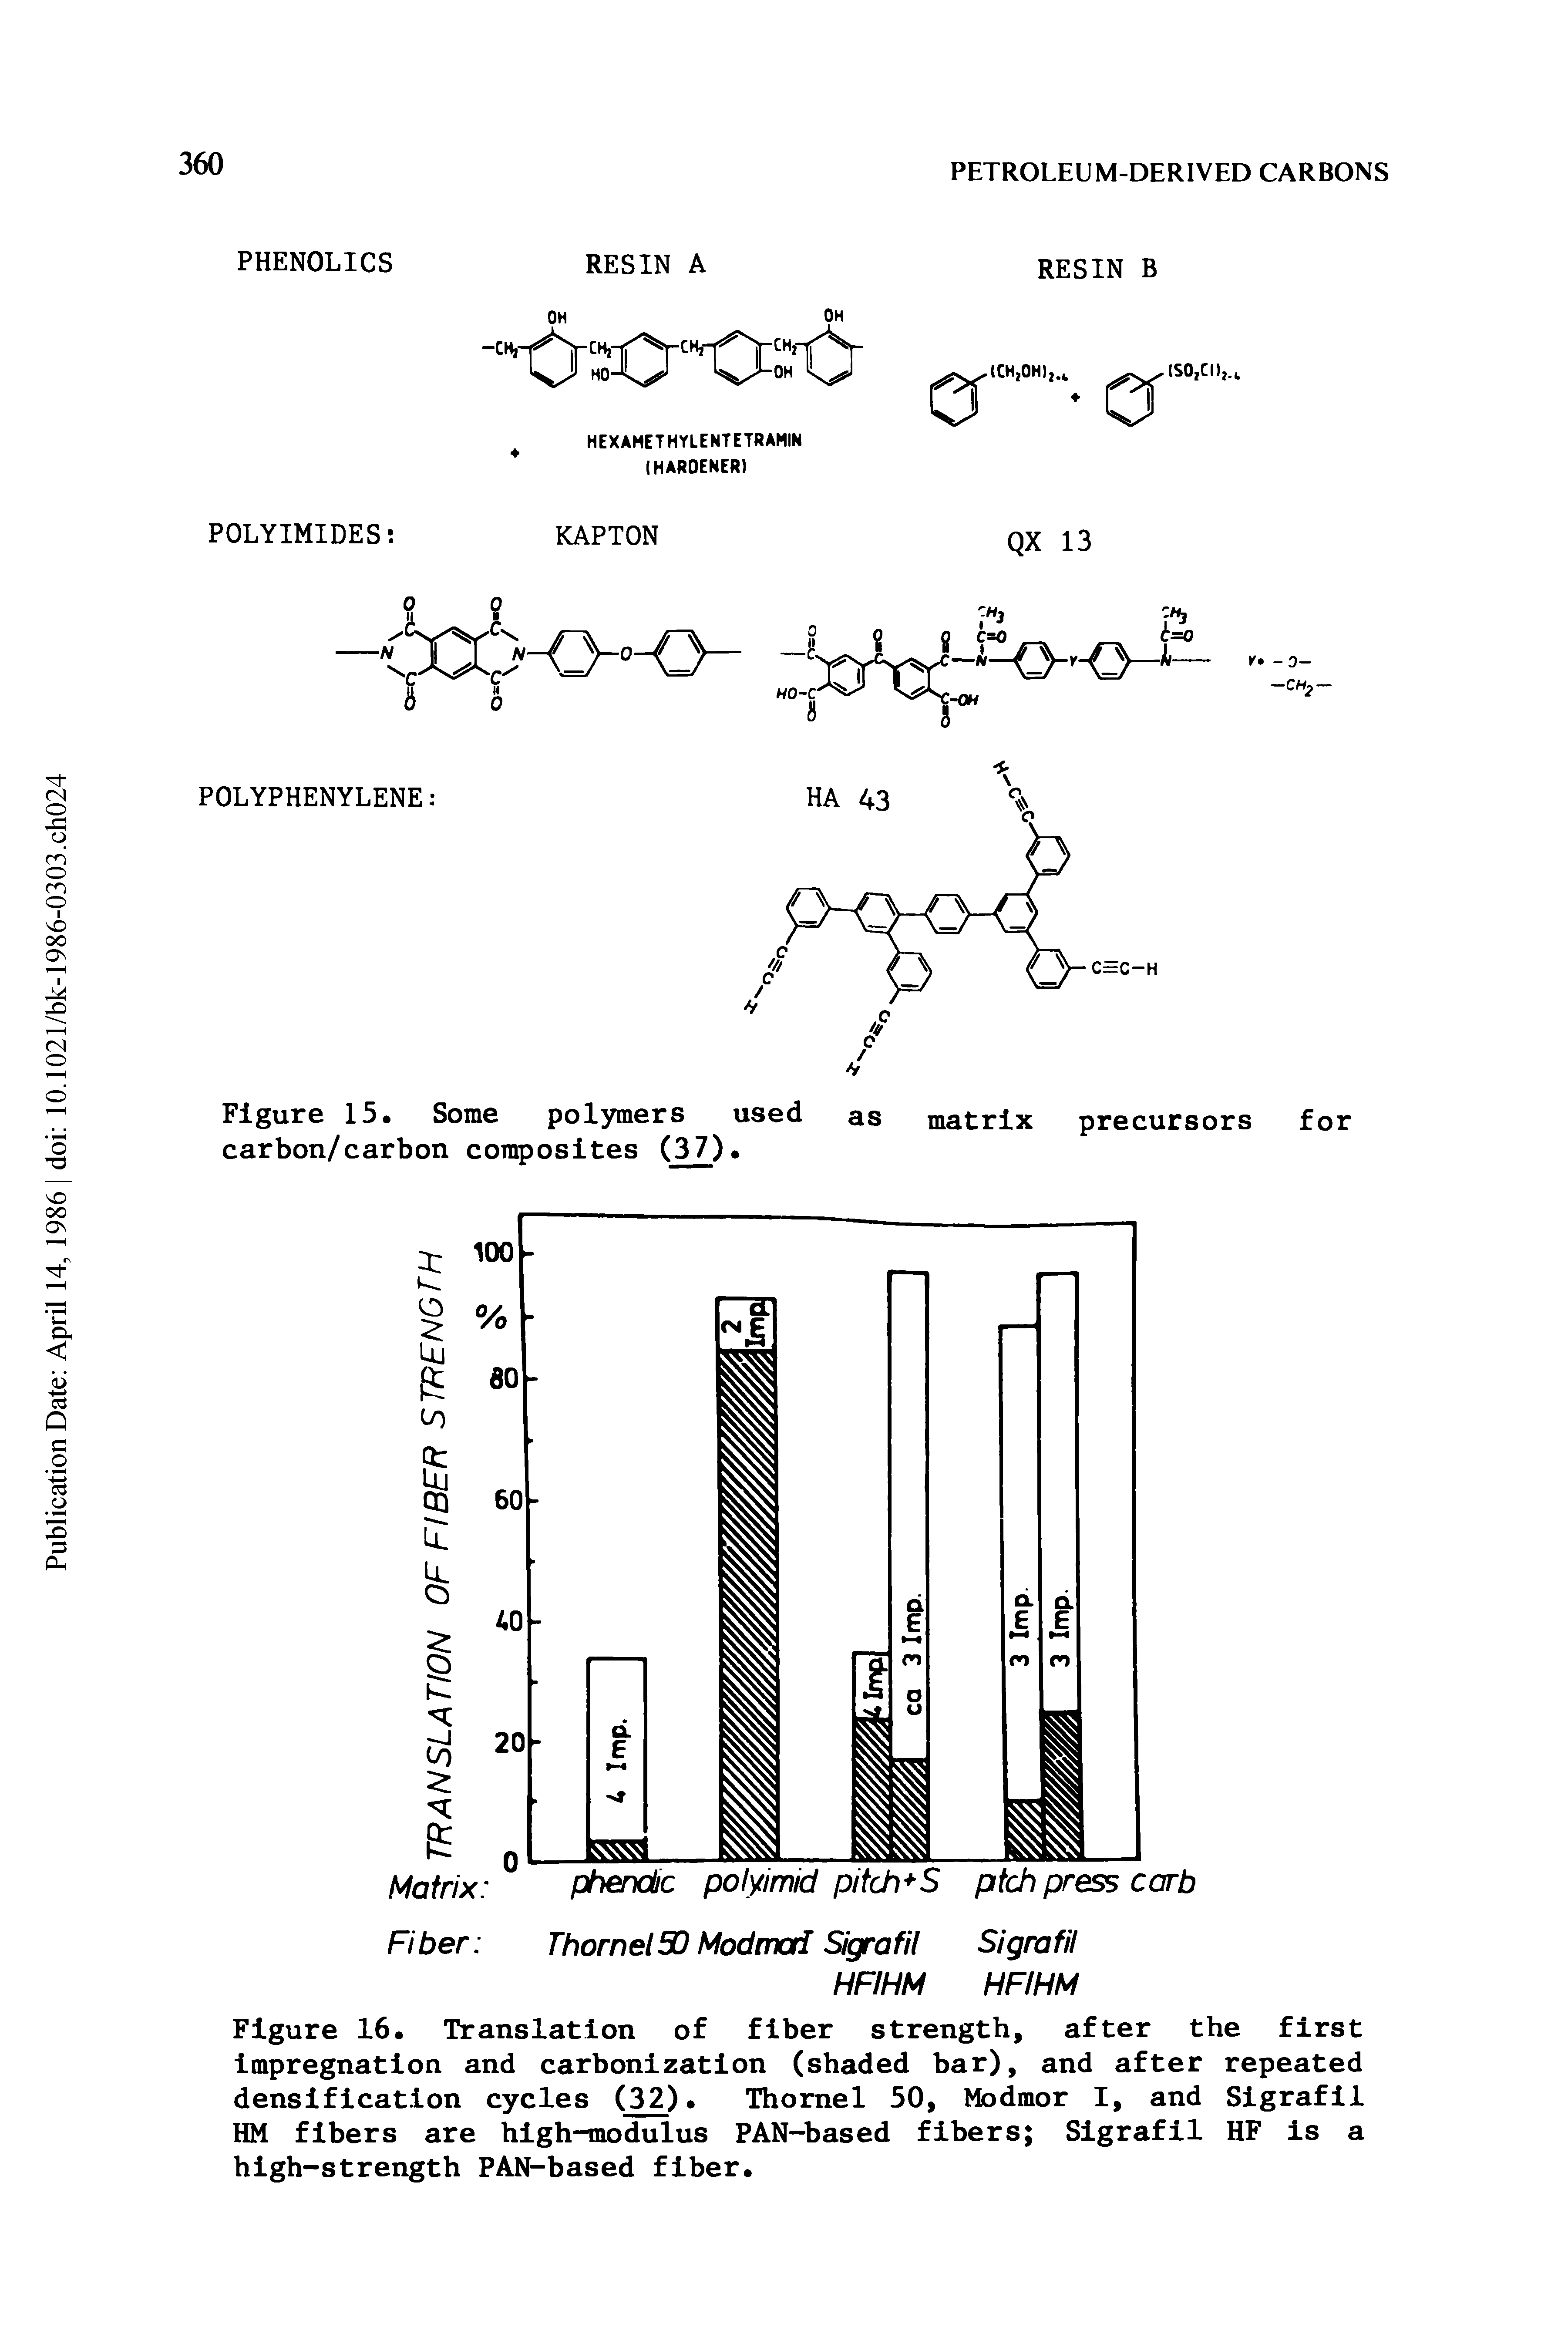 Figure 16. Translation of fiber strength, after the first impregnation and carbonization (shaded bar), and after repeated densification cycles (32). Thomel 50, Modmor I, and Sigrafil HM fibers are high-modulus PAN-based fibers Sigrafil HF is a high-strength PAN-based fiber.